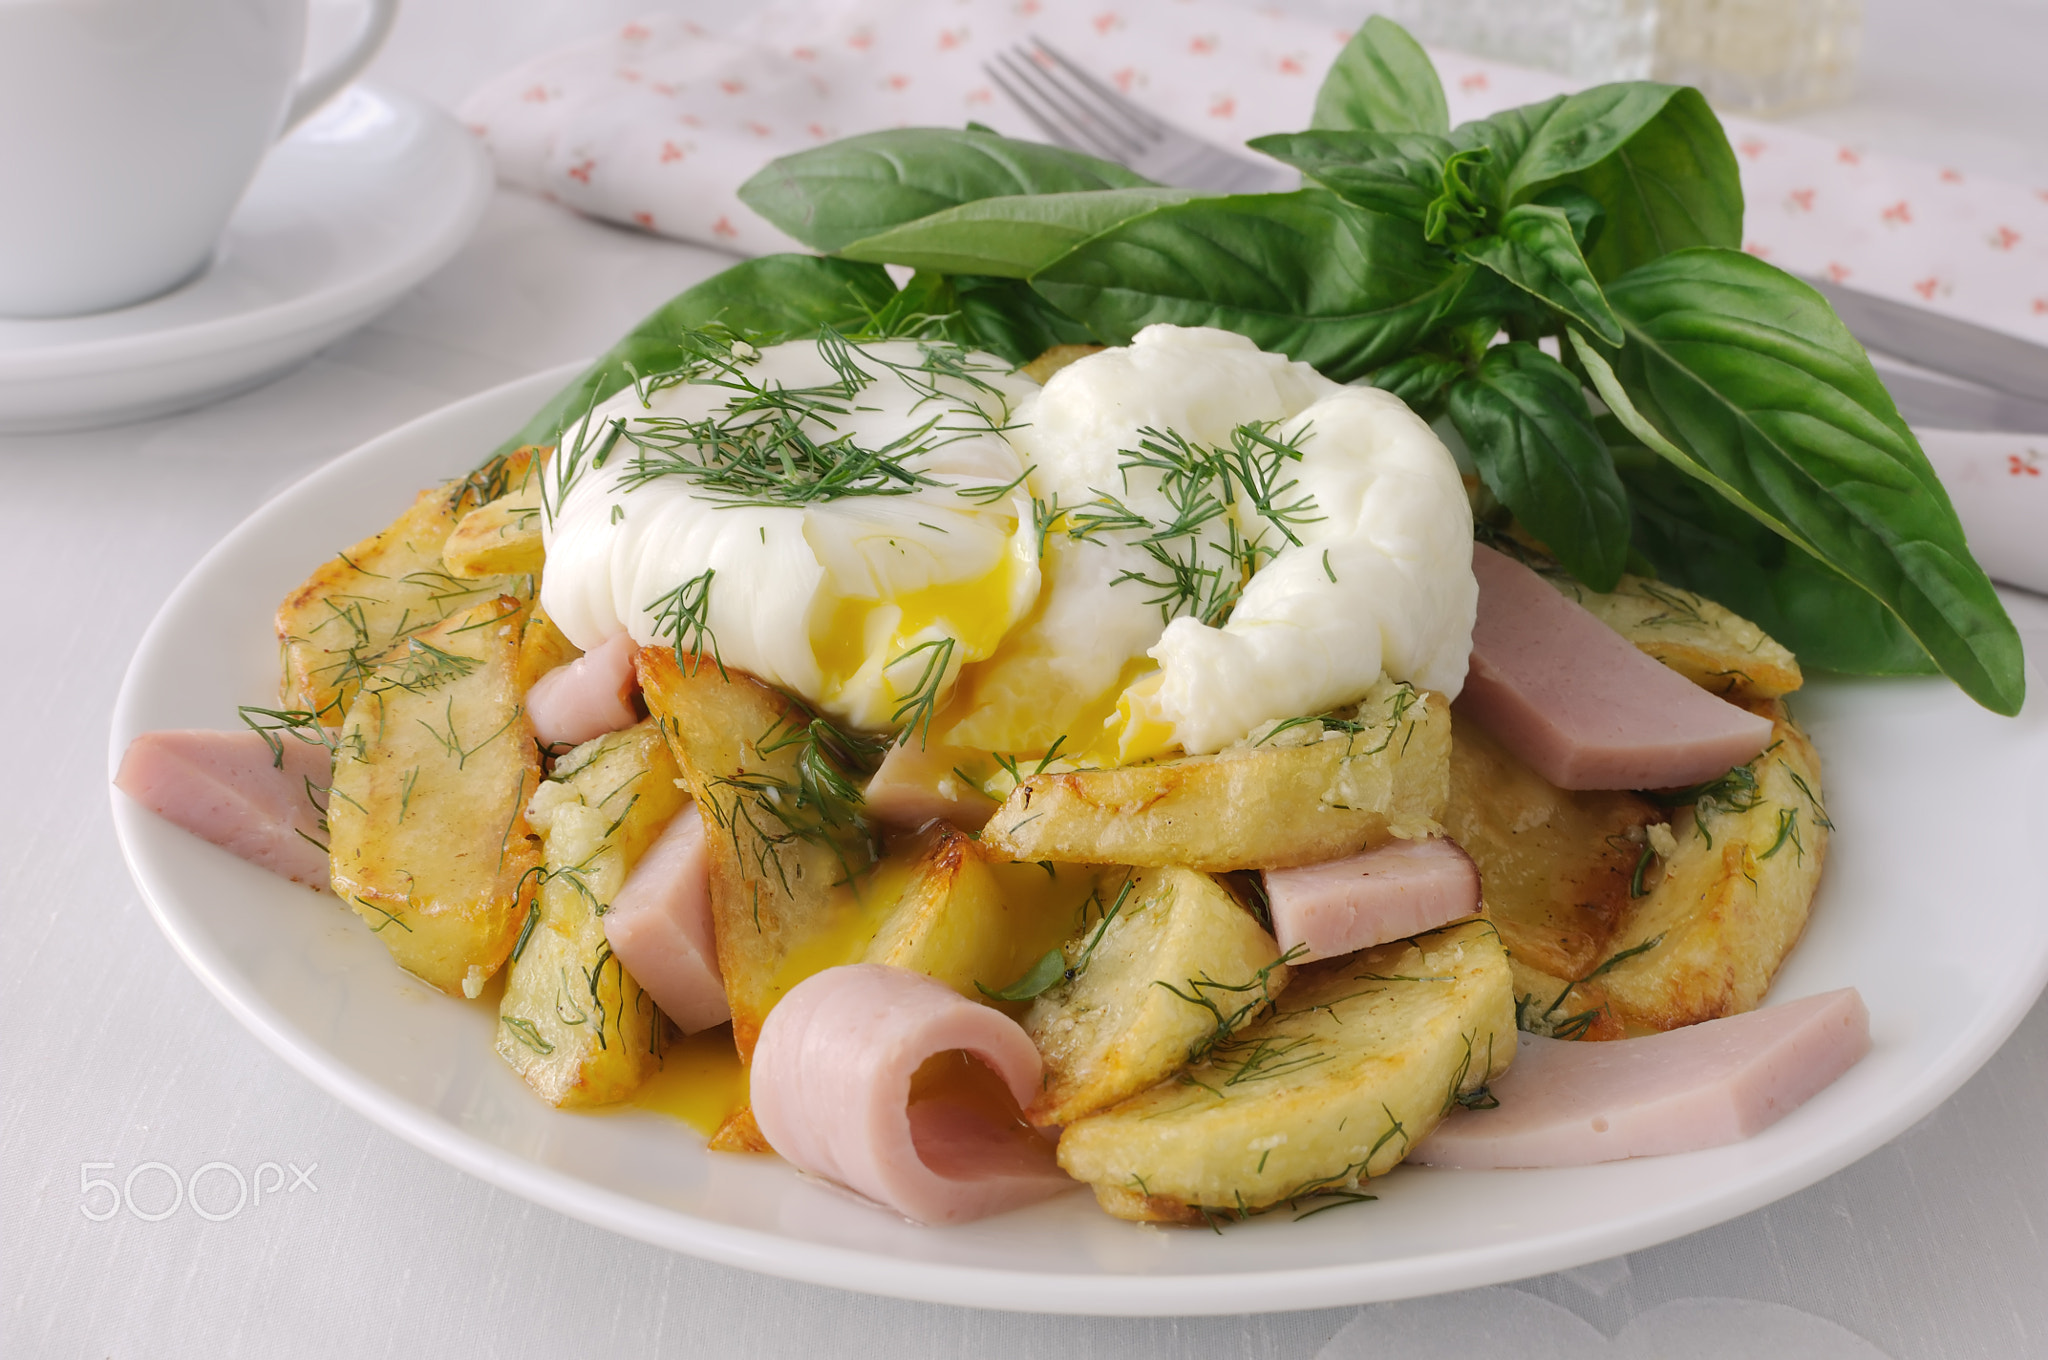 Fried potatoes with dill and ham with eggs Benedict